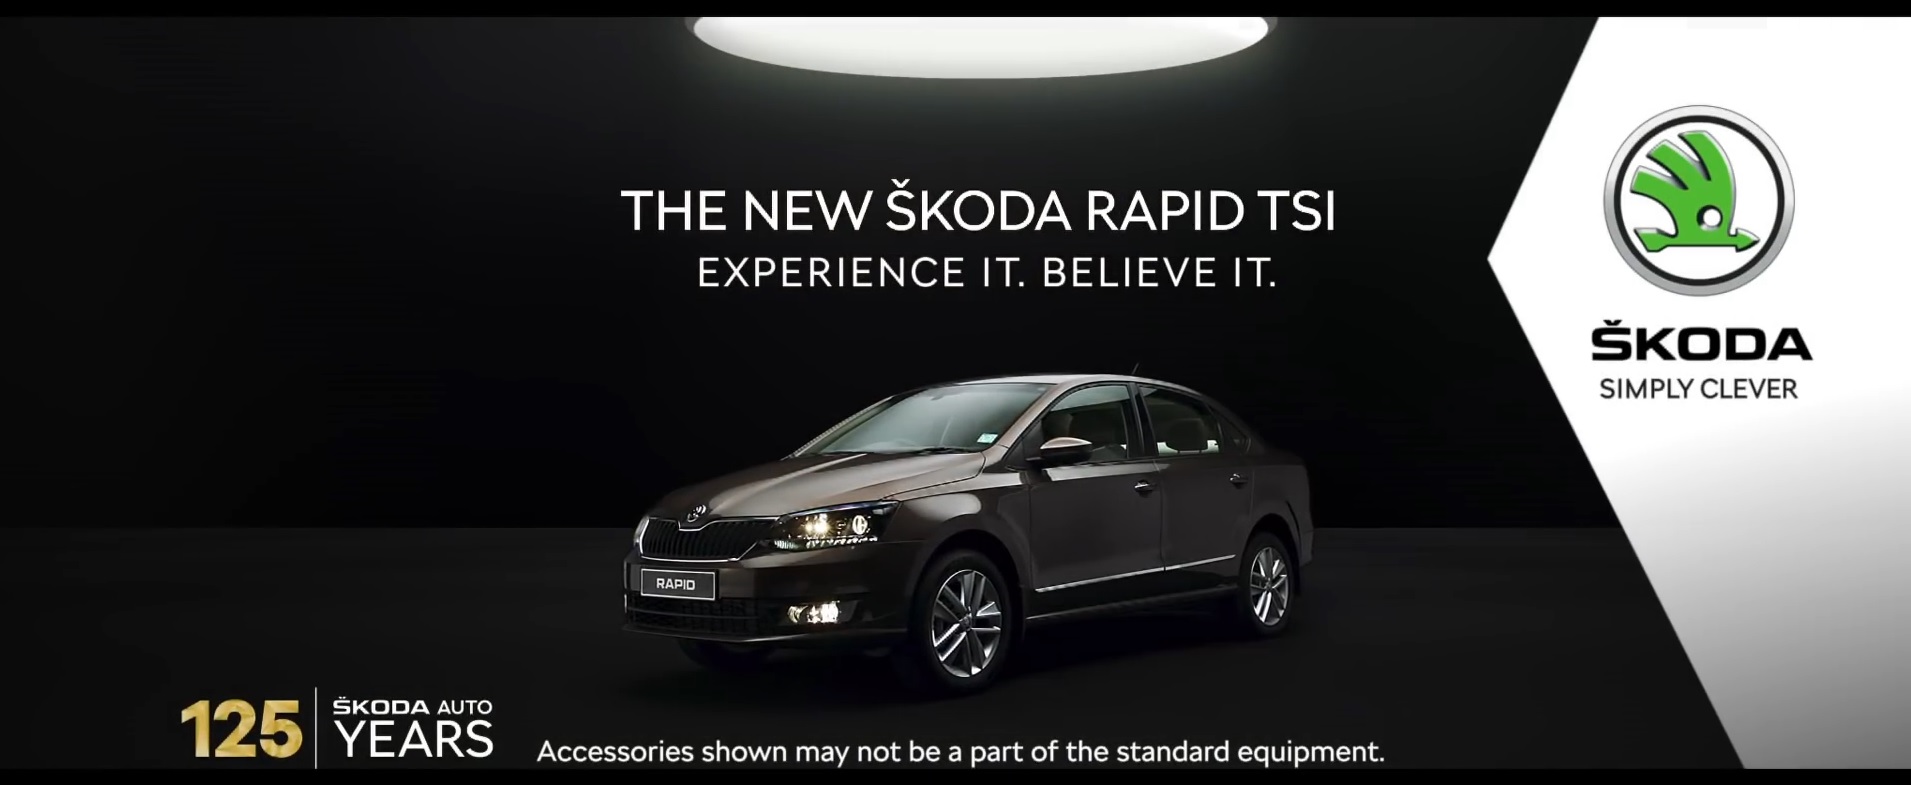 Rapid 1.0 TSI STYLE Features